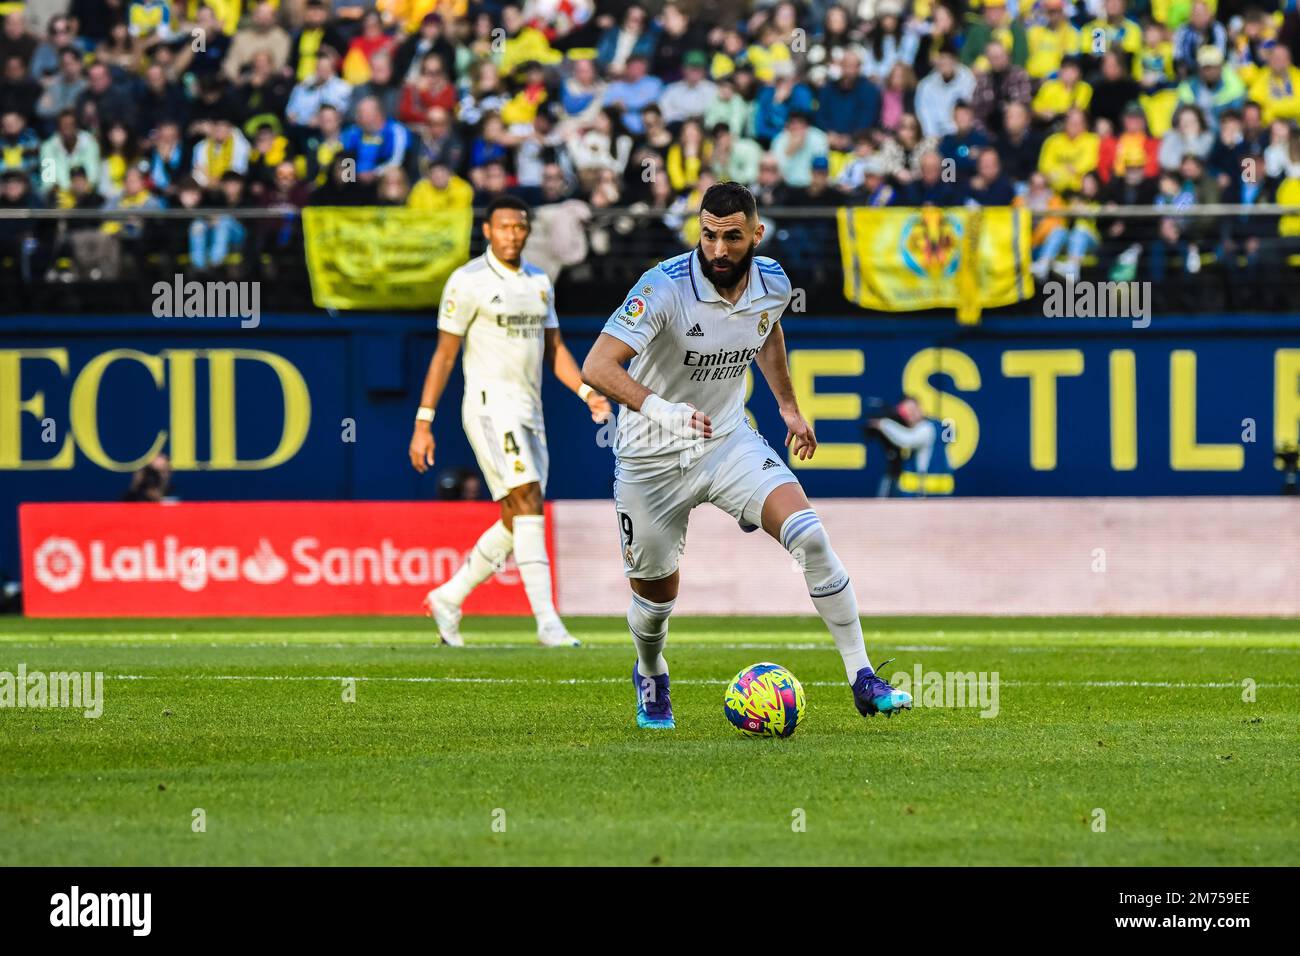 VILLARREAL, SPAIN - JANUARY 7: Karim Benzema of Real Madrid CF control the ball  during the match between Villarreal CF and Real Madrid CF of La Liga Santander on January 7, 2023 at Estadi de la Ceramica in Villarreal, Spain. (Photo by Samuel Carreño/ PX Images) Credit: Px Images/Alamy Live News Stock Photo